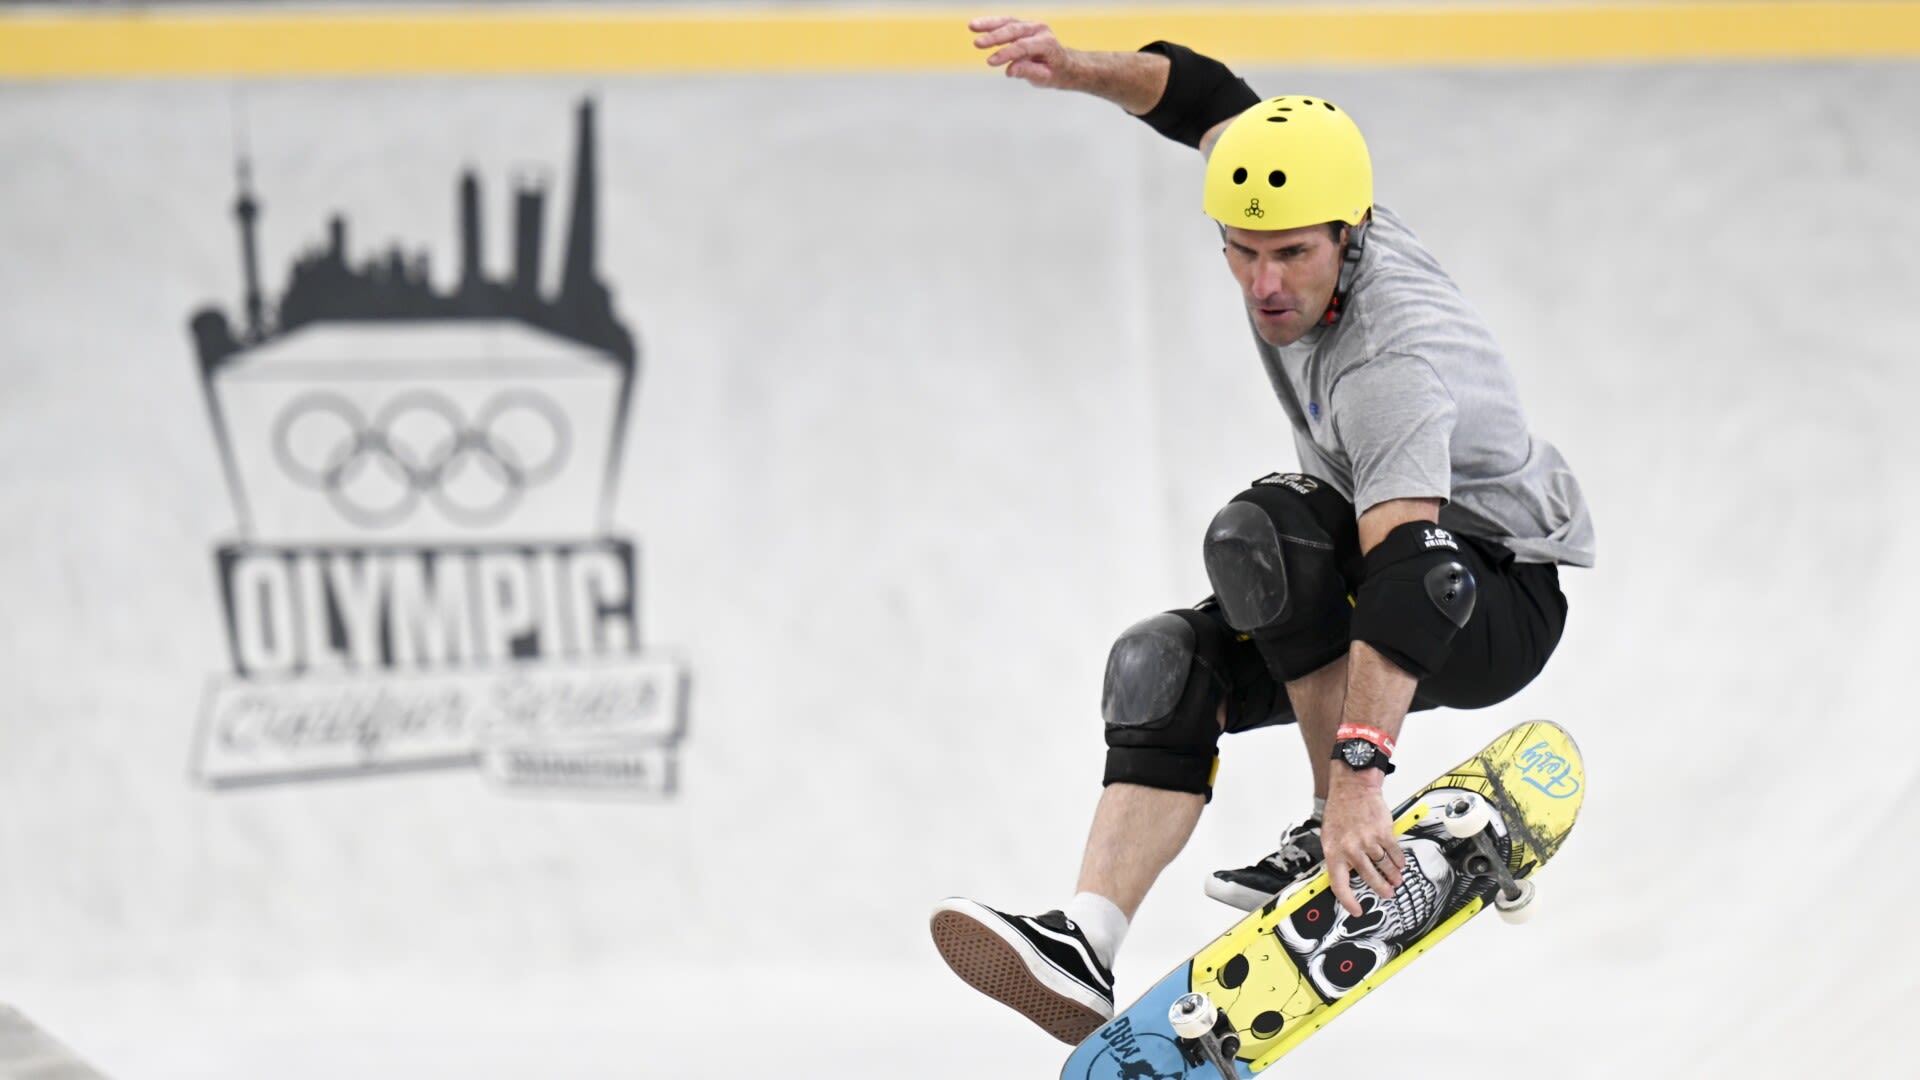 Andy Macdonald qualifies for Paris Olympic skateboarding at age 50